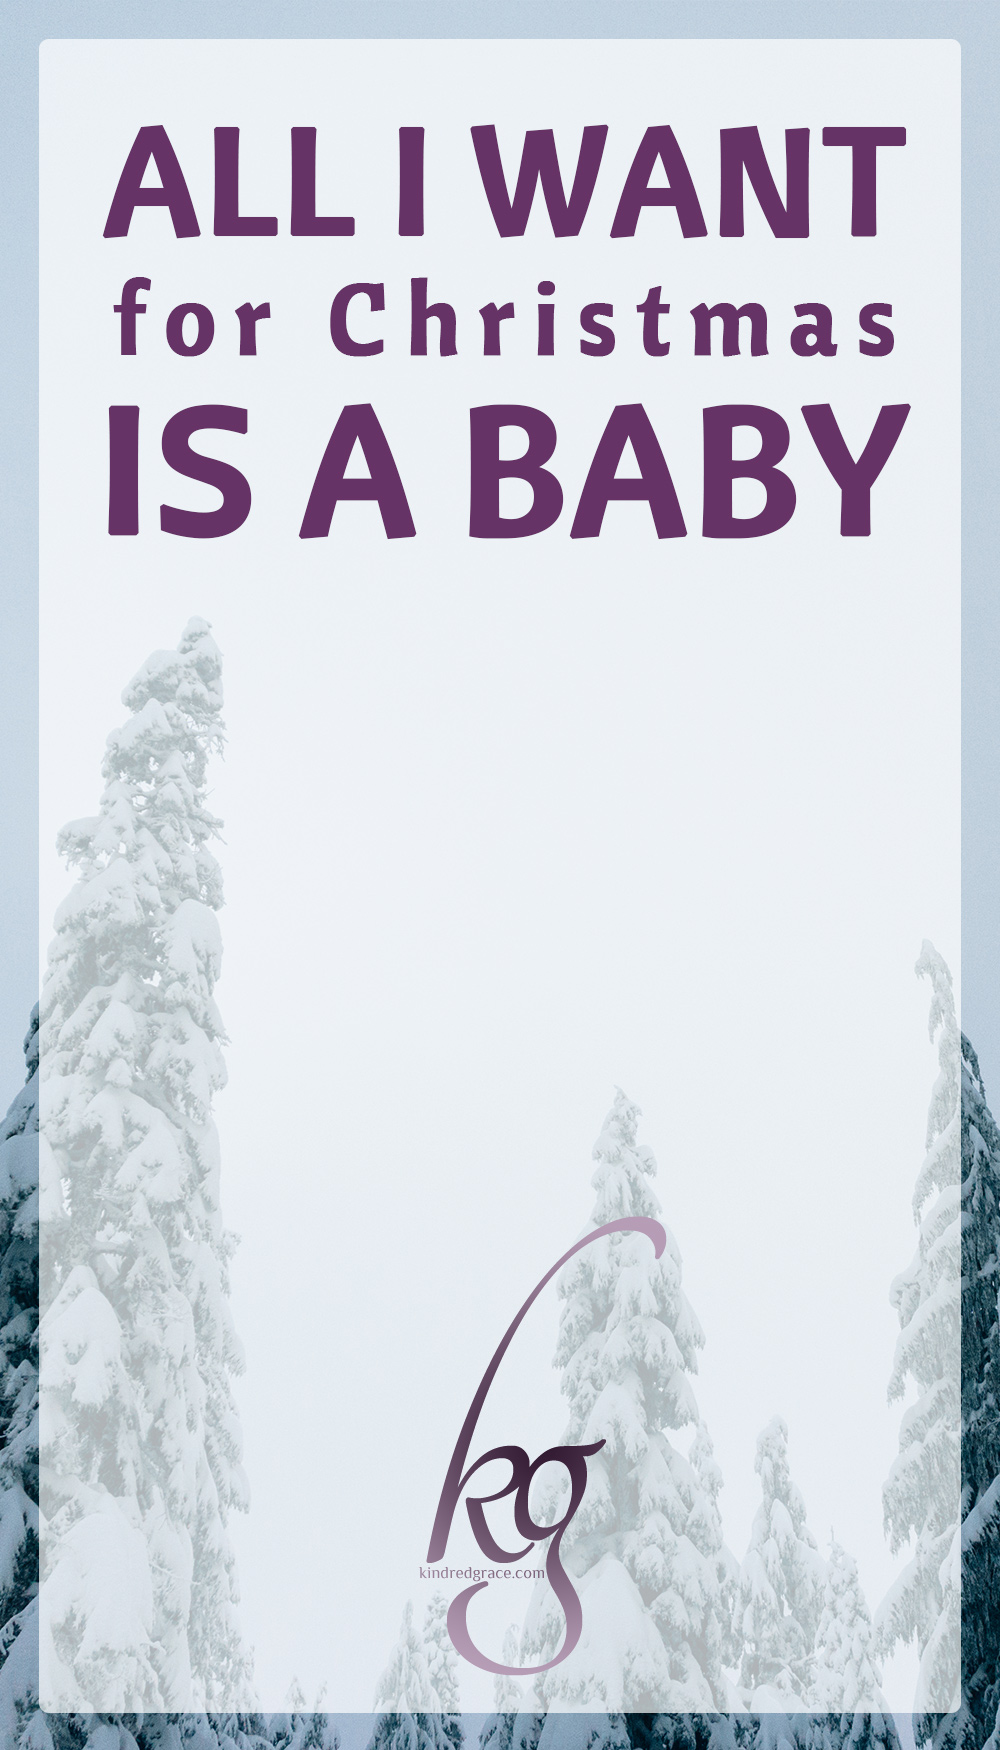 When All You Want for Christmas is a Baby via @KindredGrace